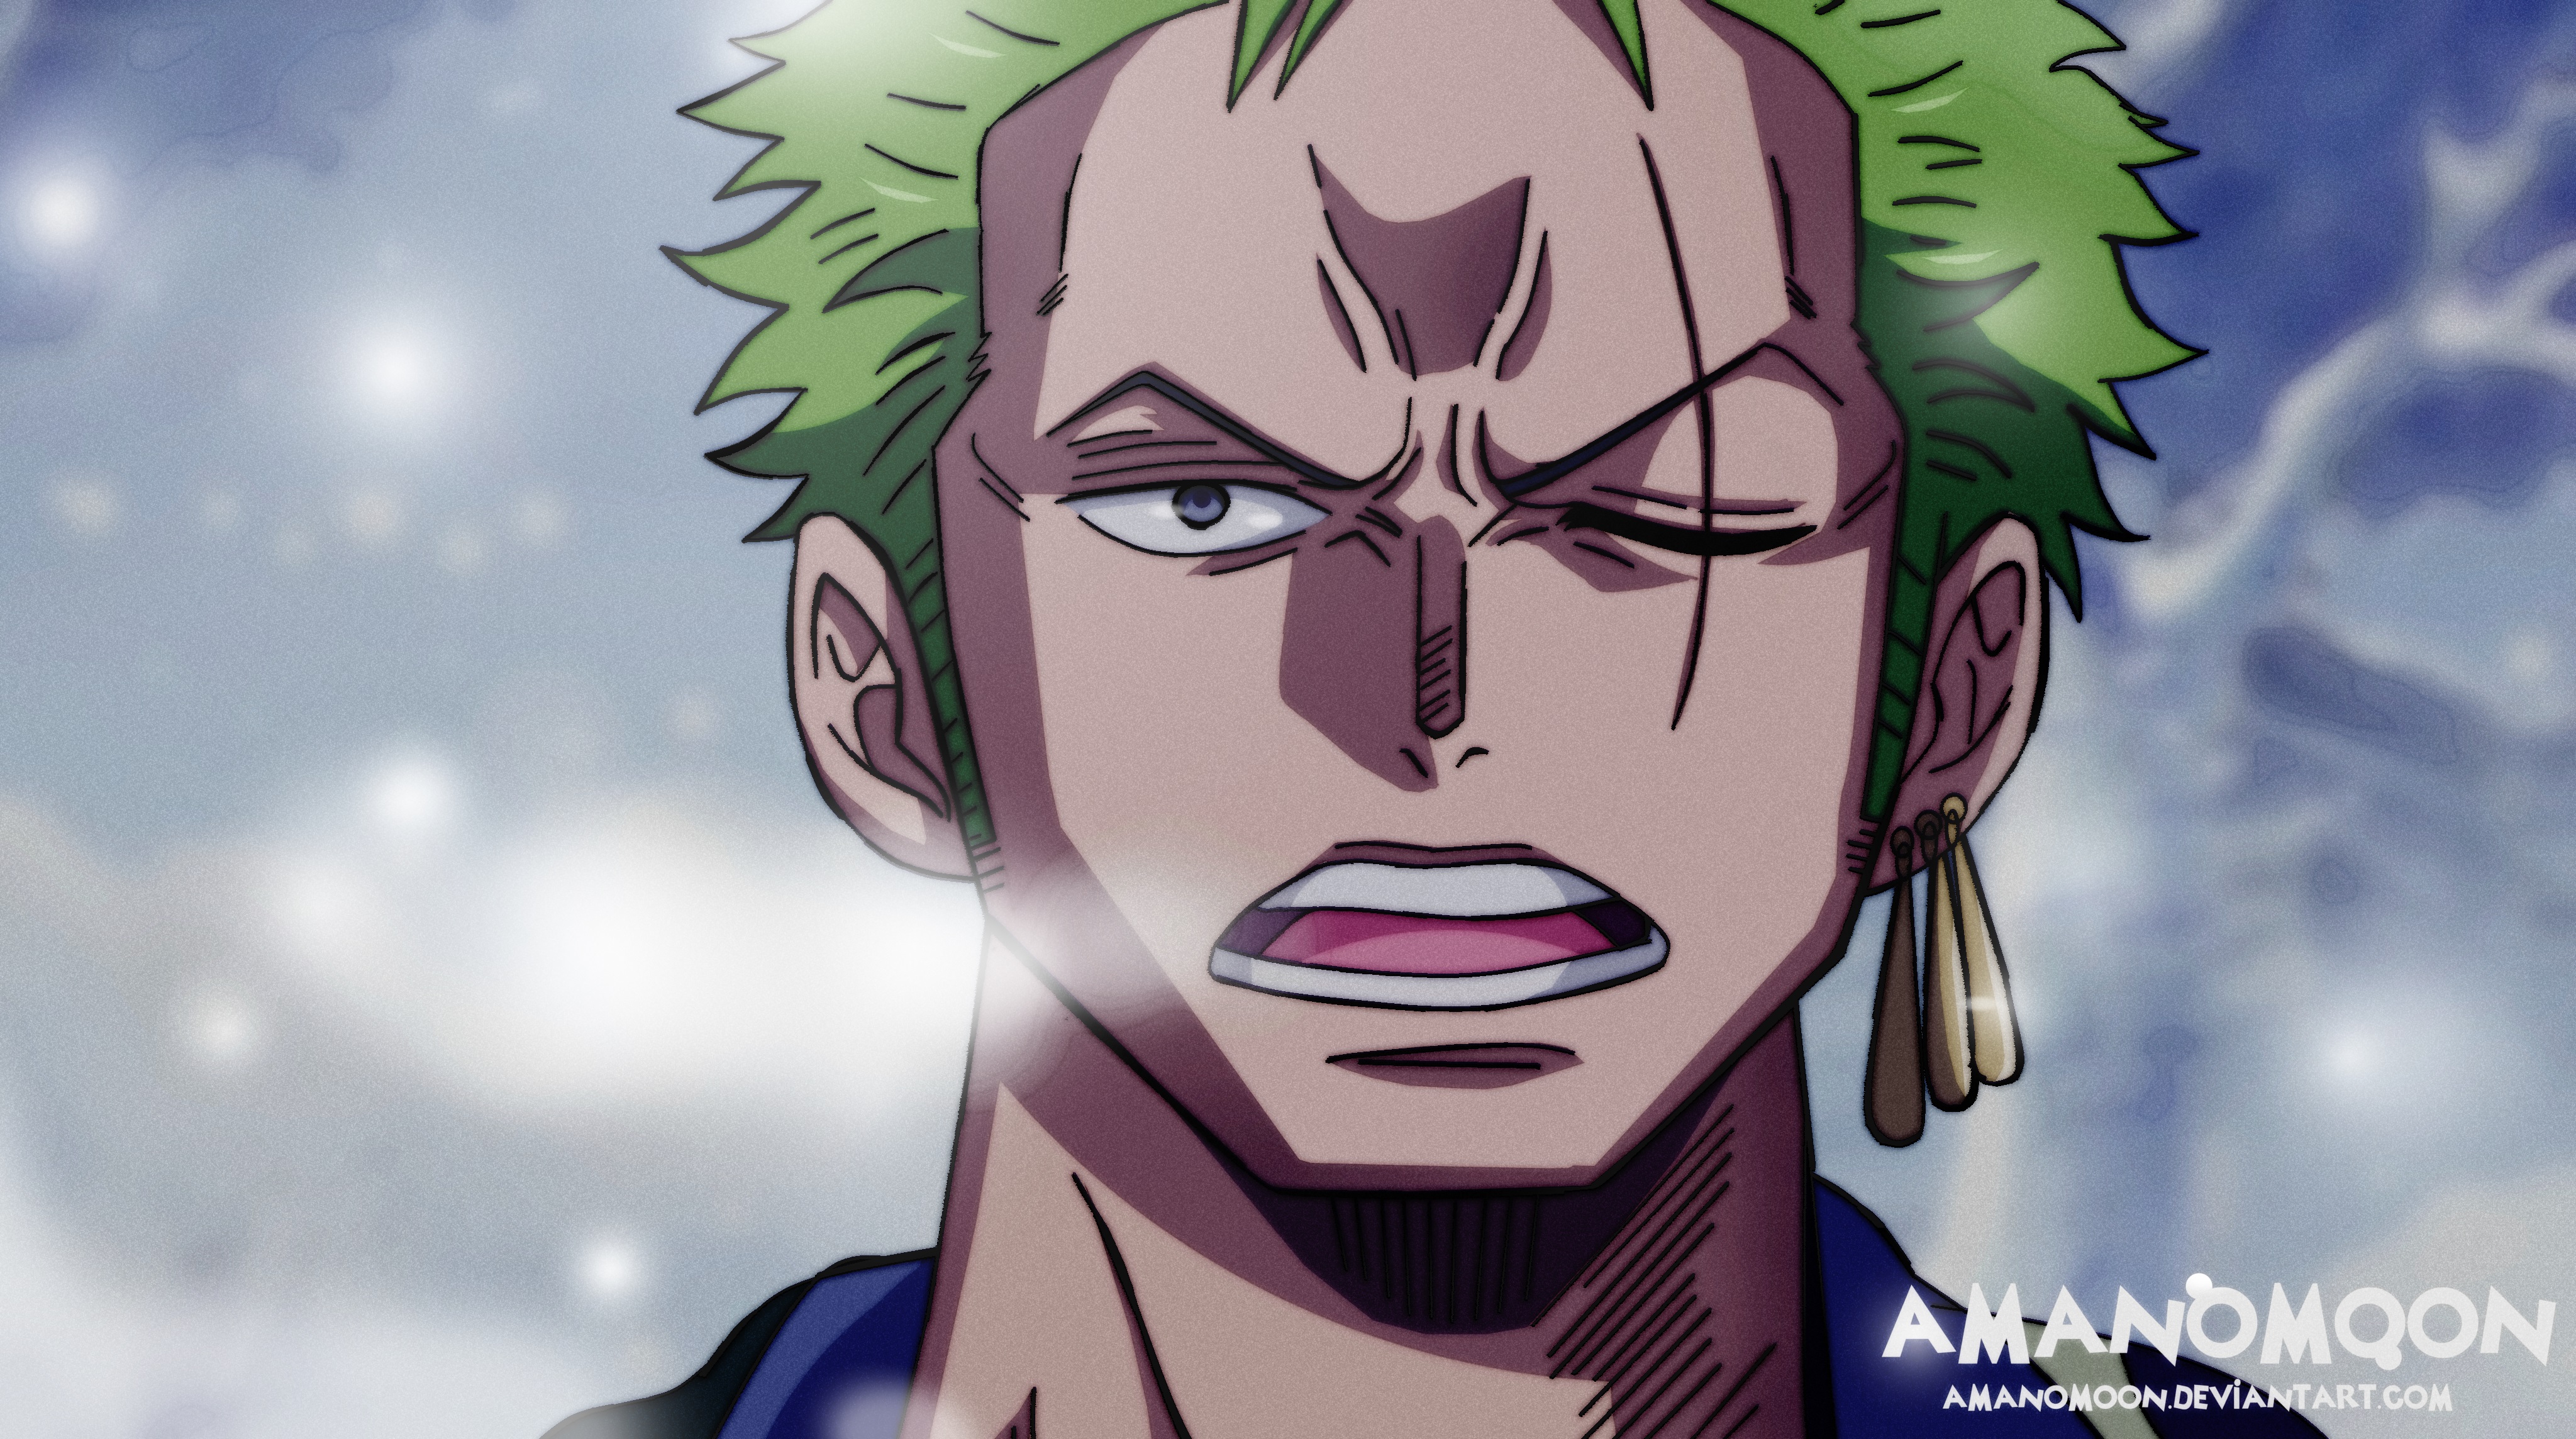 Anime One Piece 4k Ultra HD Wallpaper by Amanomoon